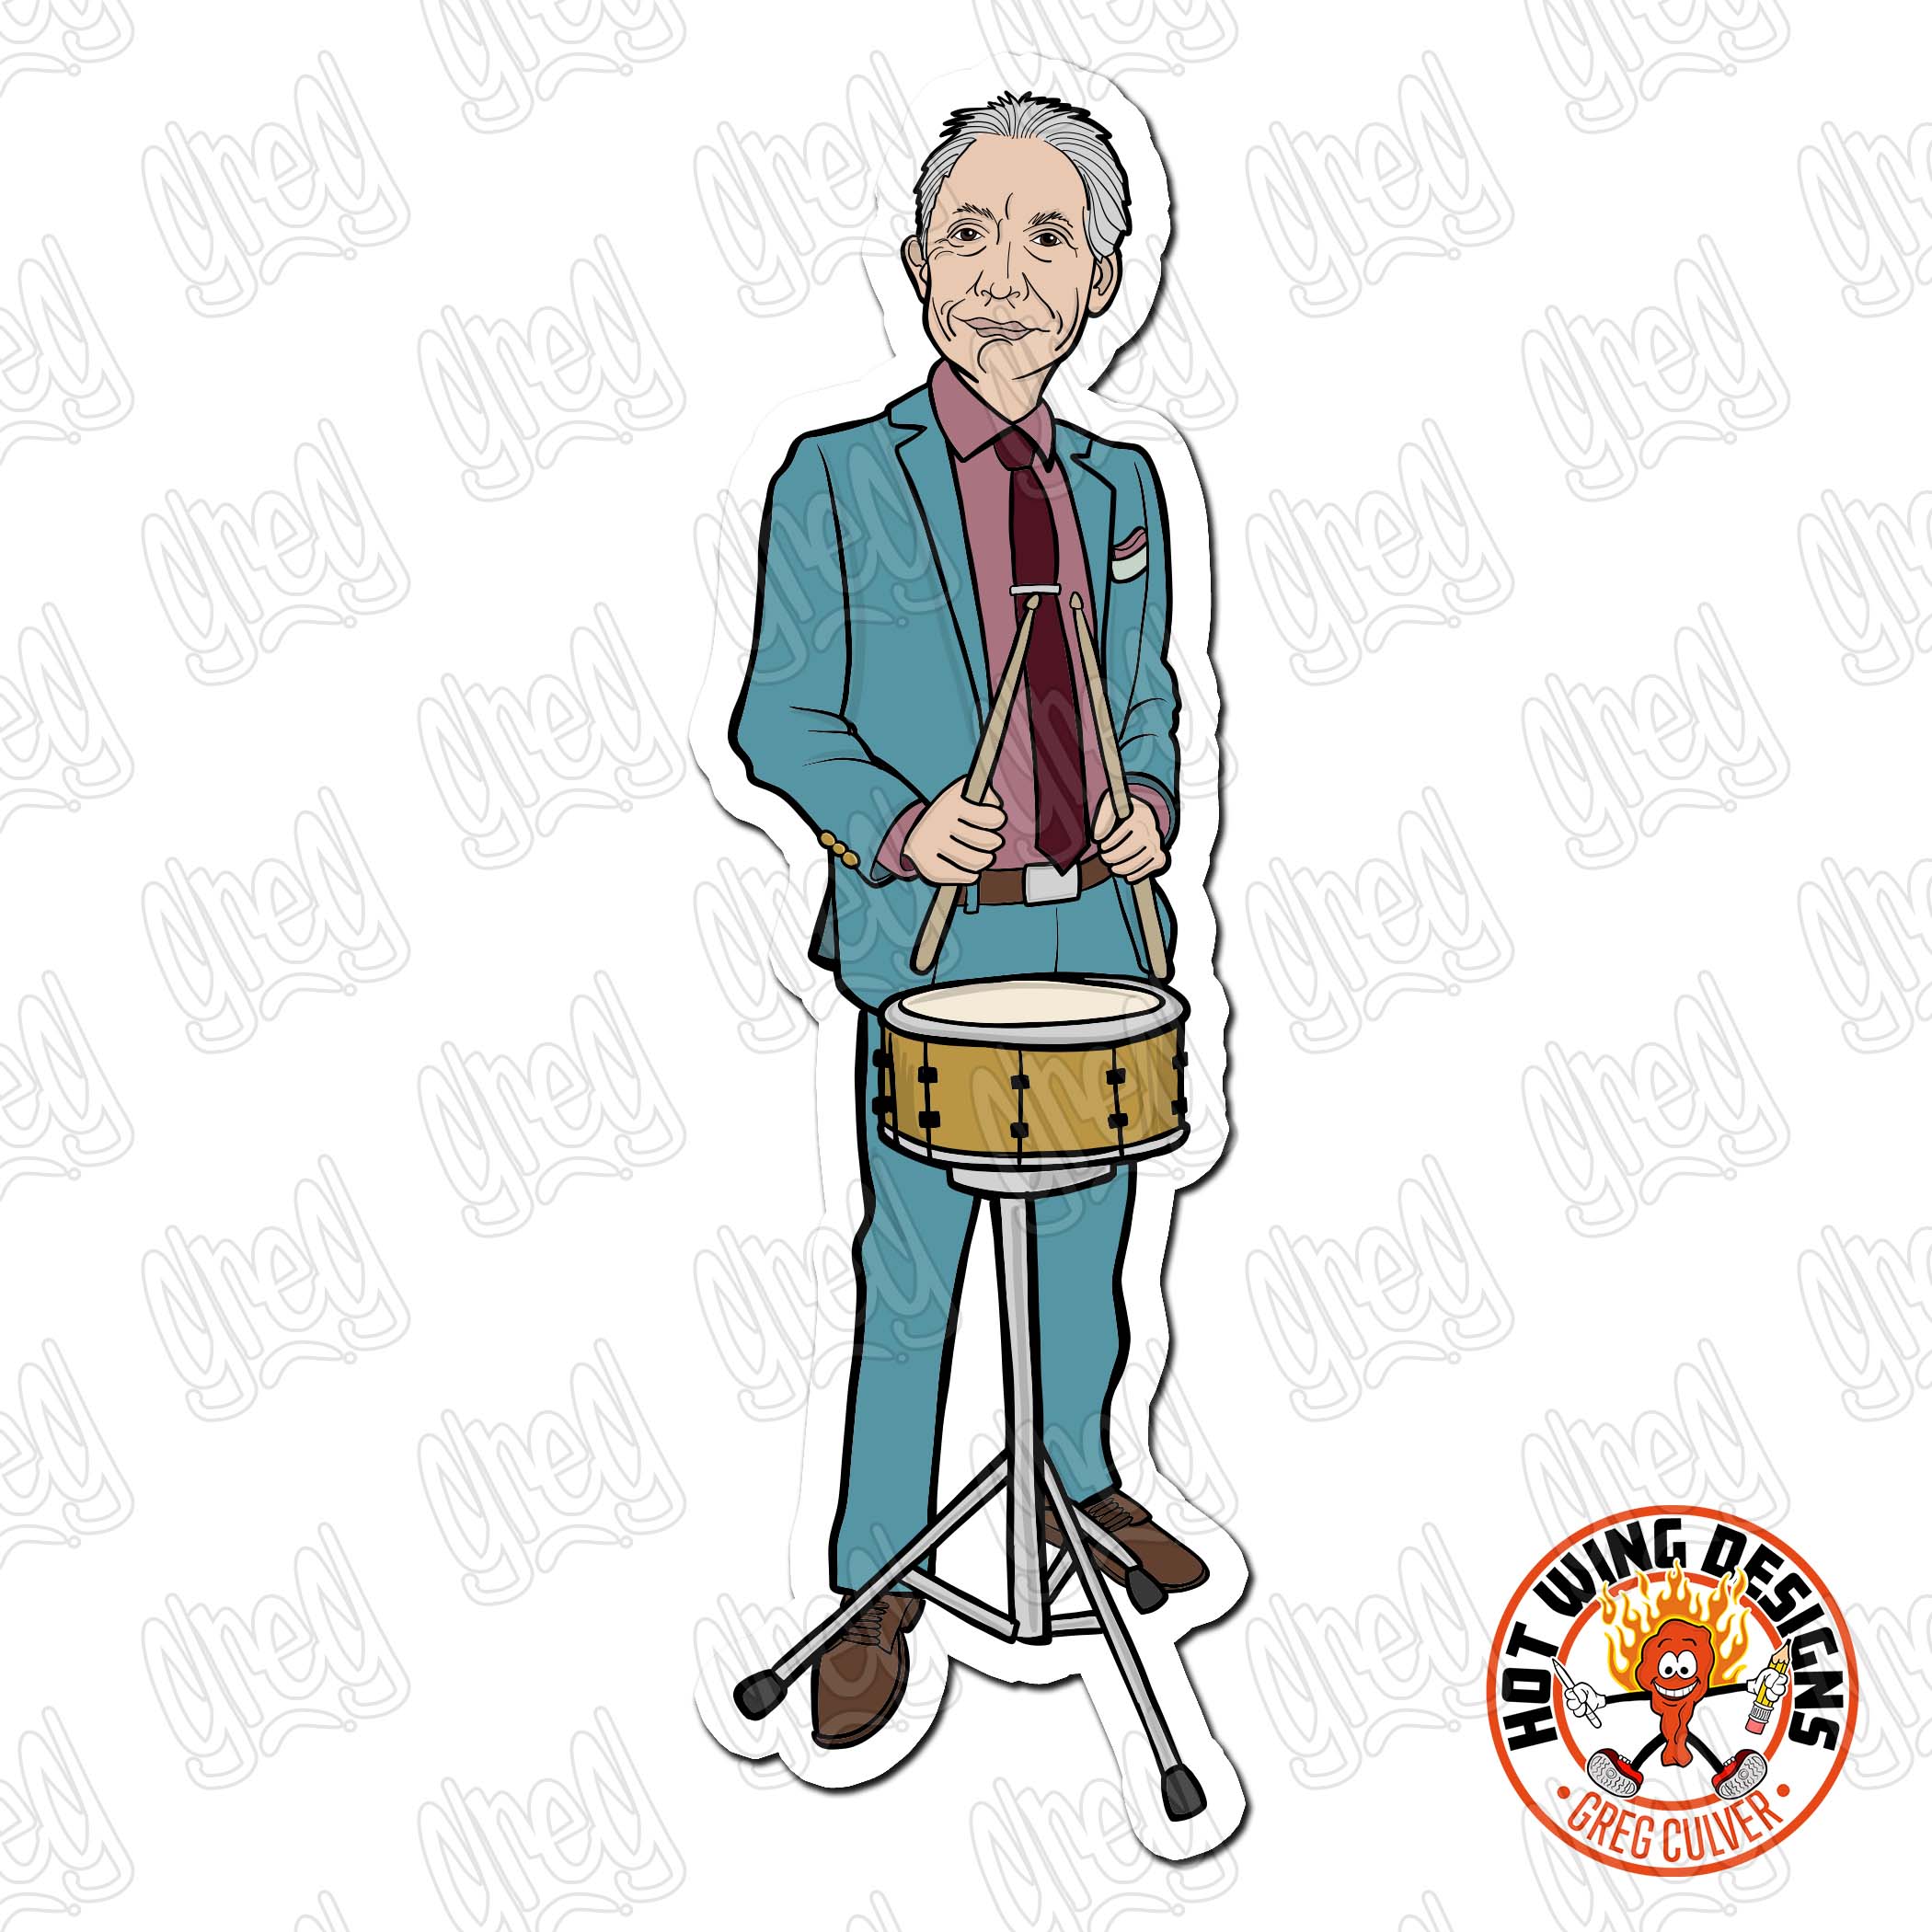 Charlie Watts cartoon by Greg Culver and Hot Wing Designs